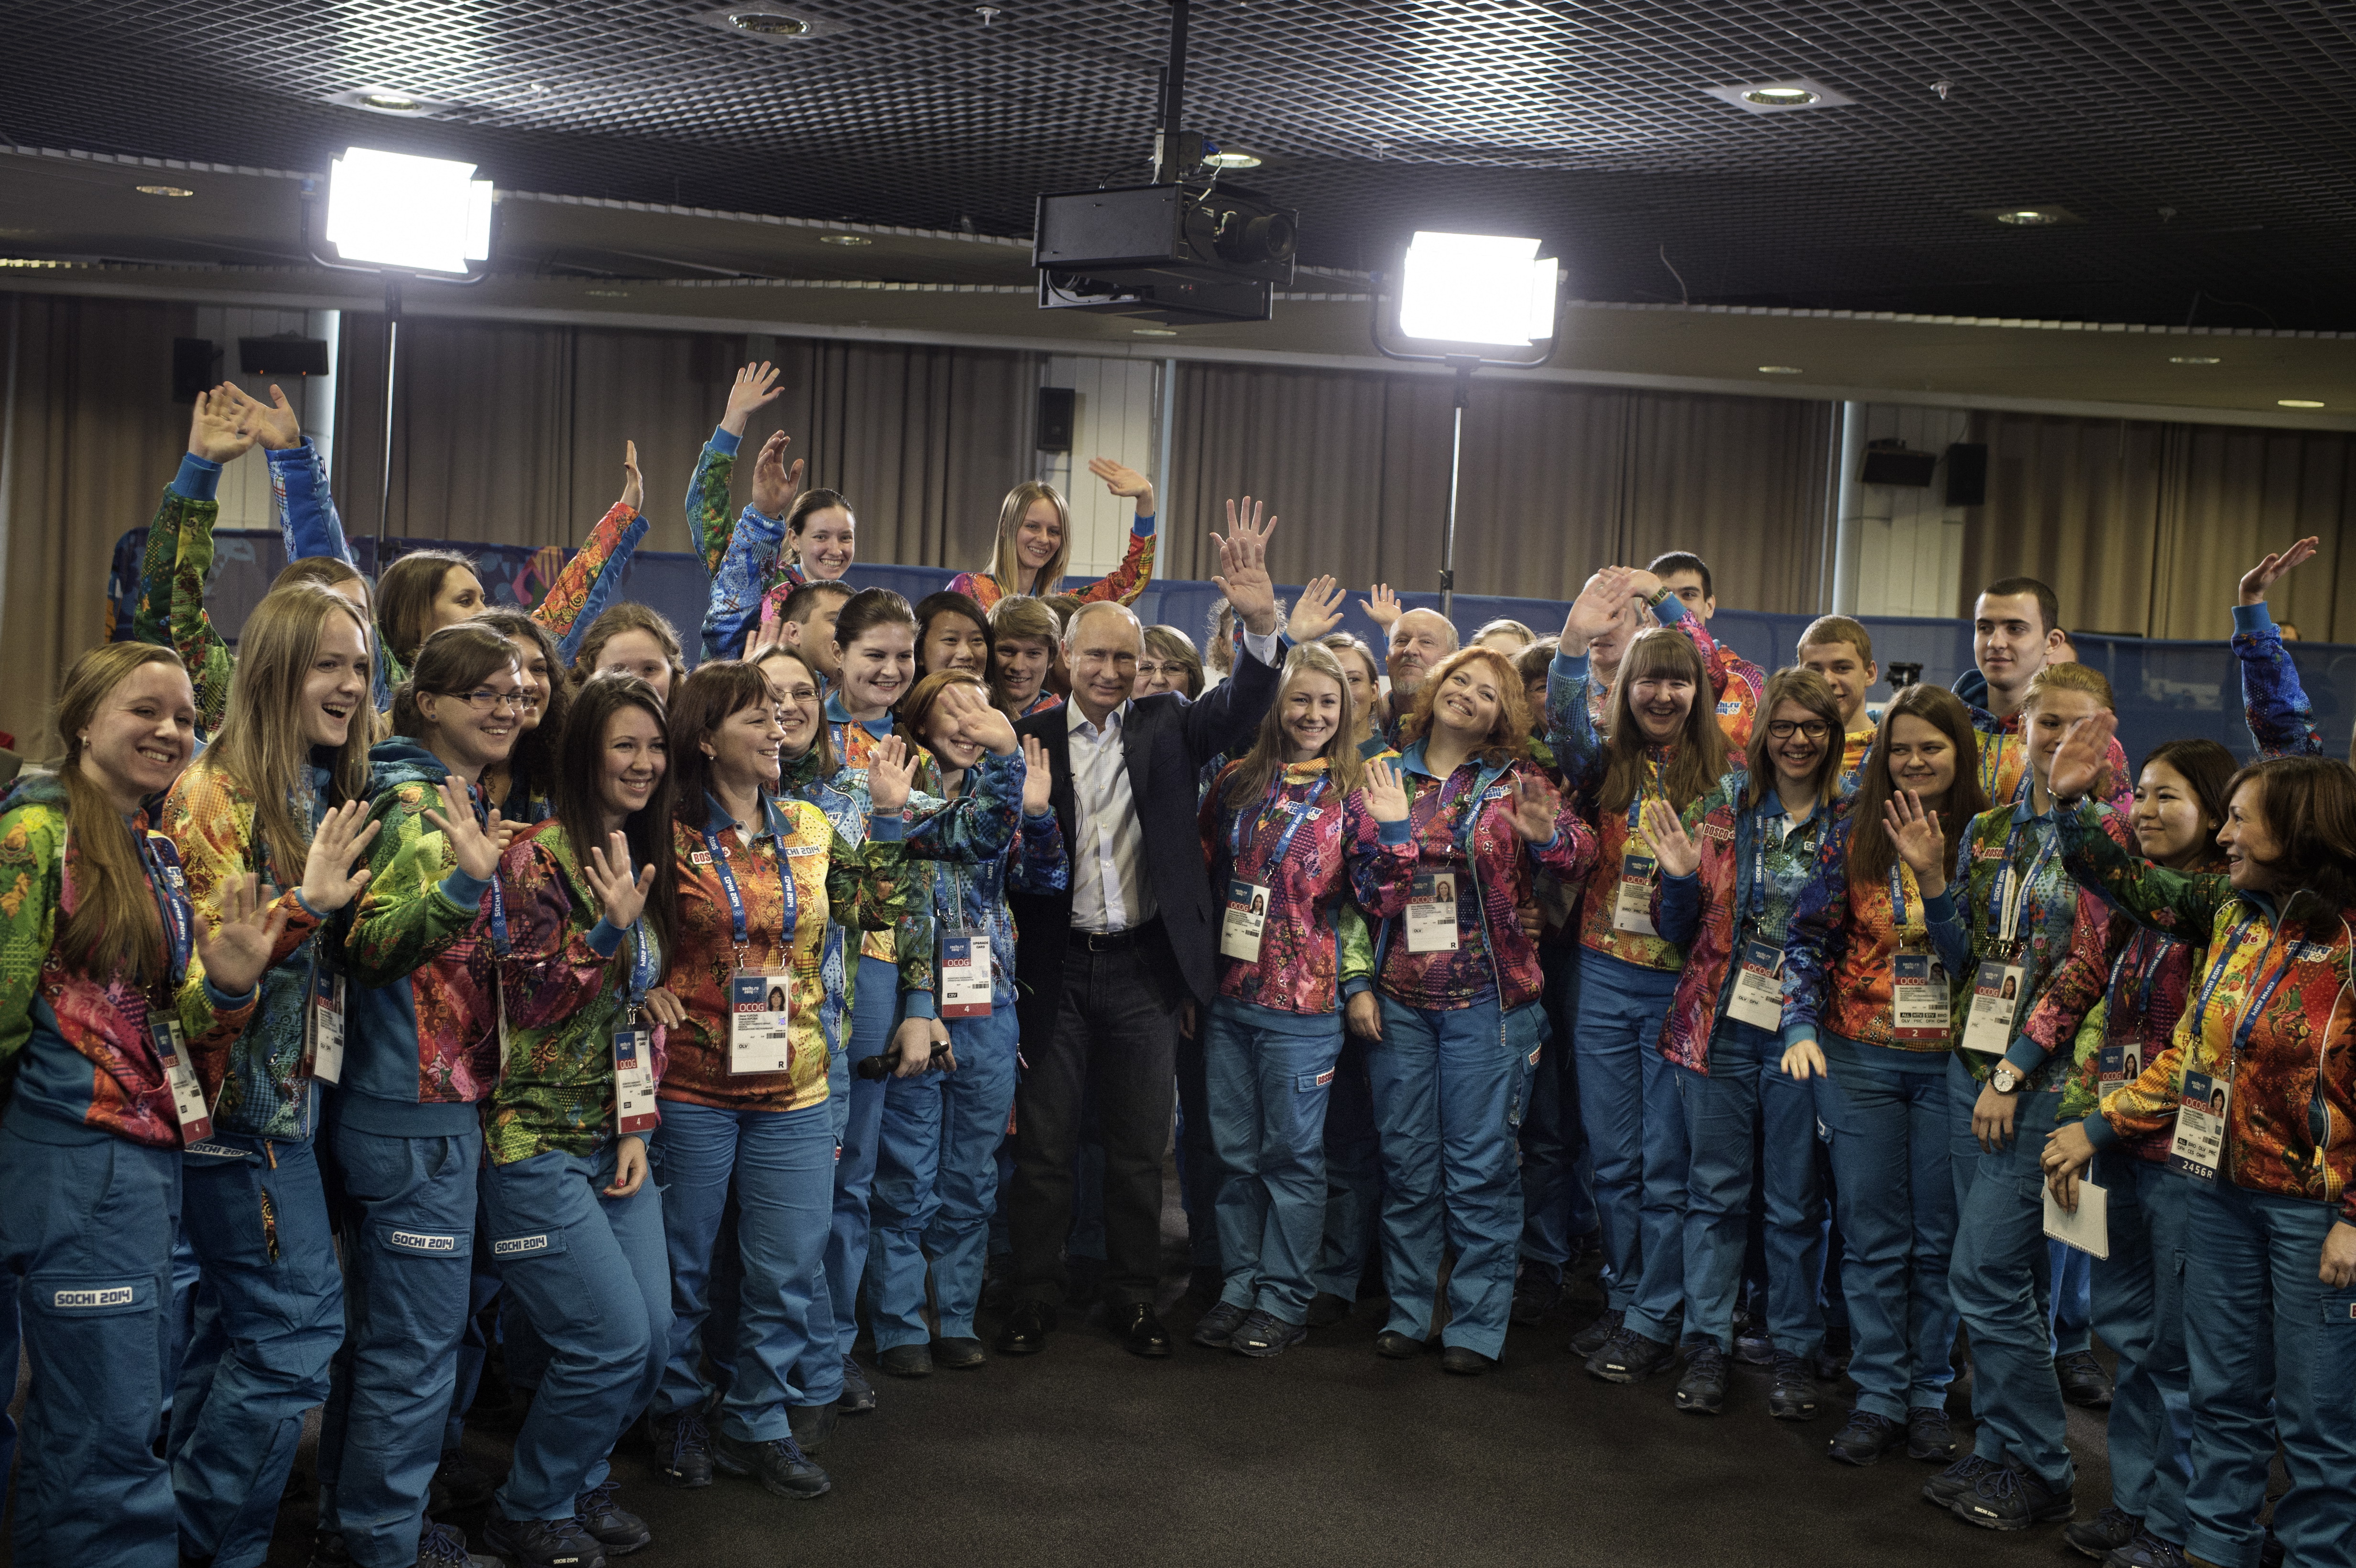 Sochi, Russia, Jan. 17, 2014: Russian President Vladimir Putin poses with a group of Olympic volunteers who will help coordinate the Winter Games in Sochi.